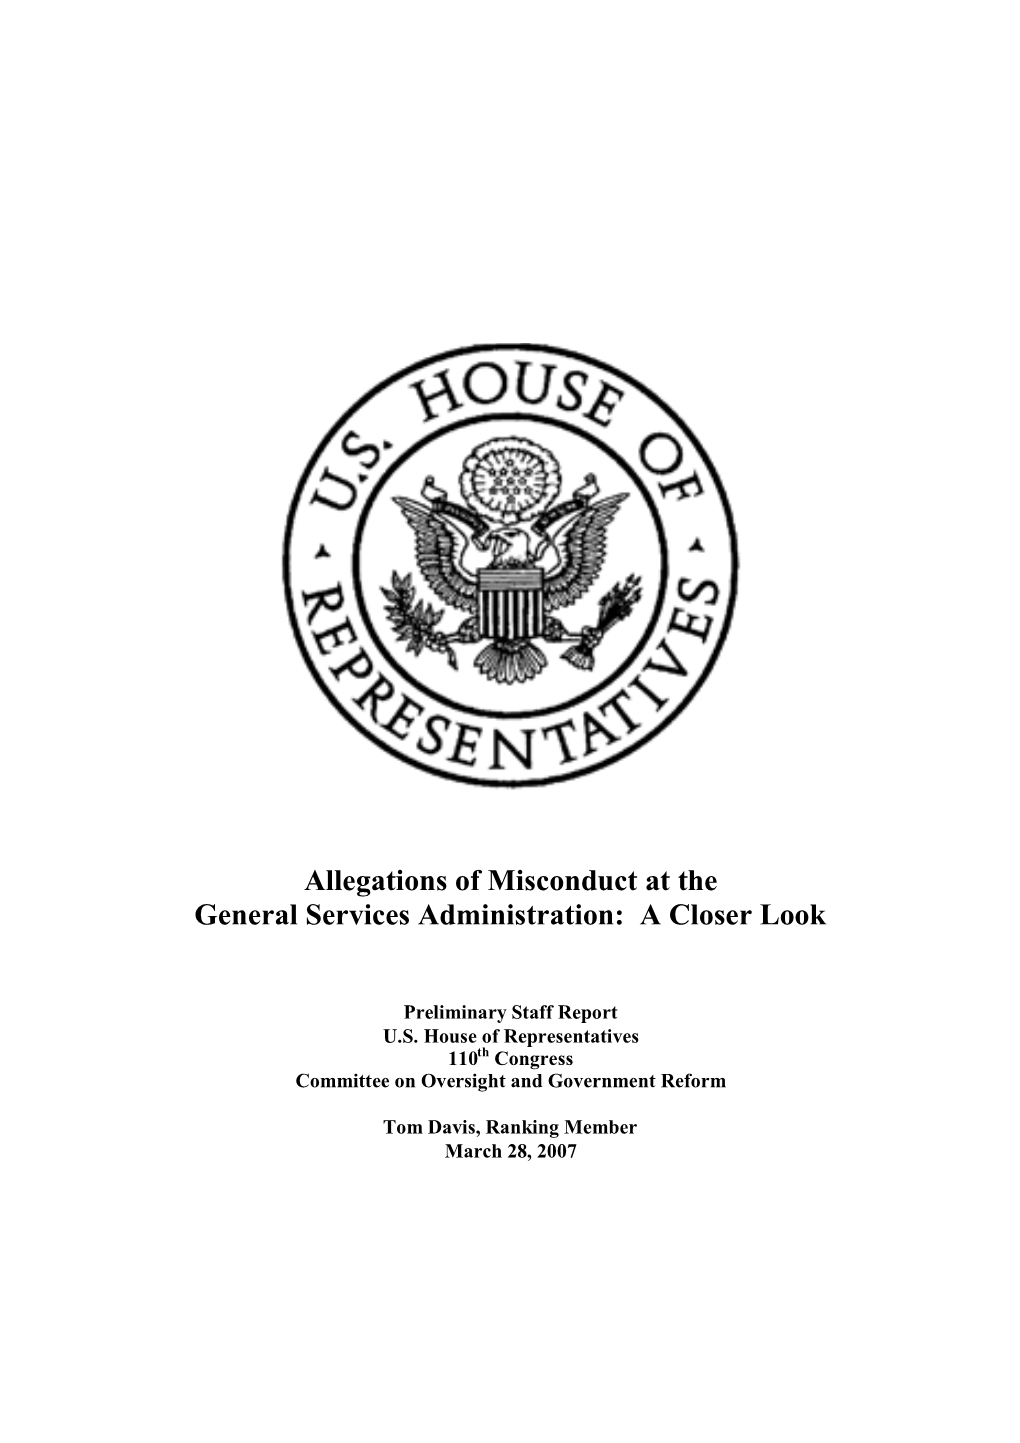 Allegations of Misconduct at the General Services Administration: a Closer Look